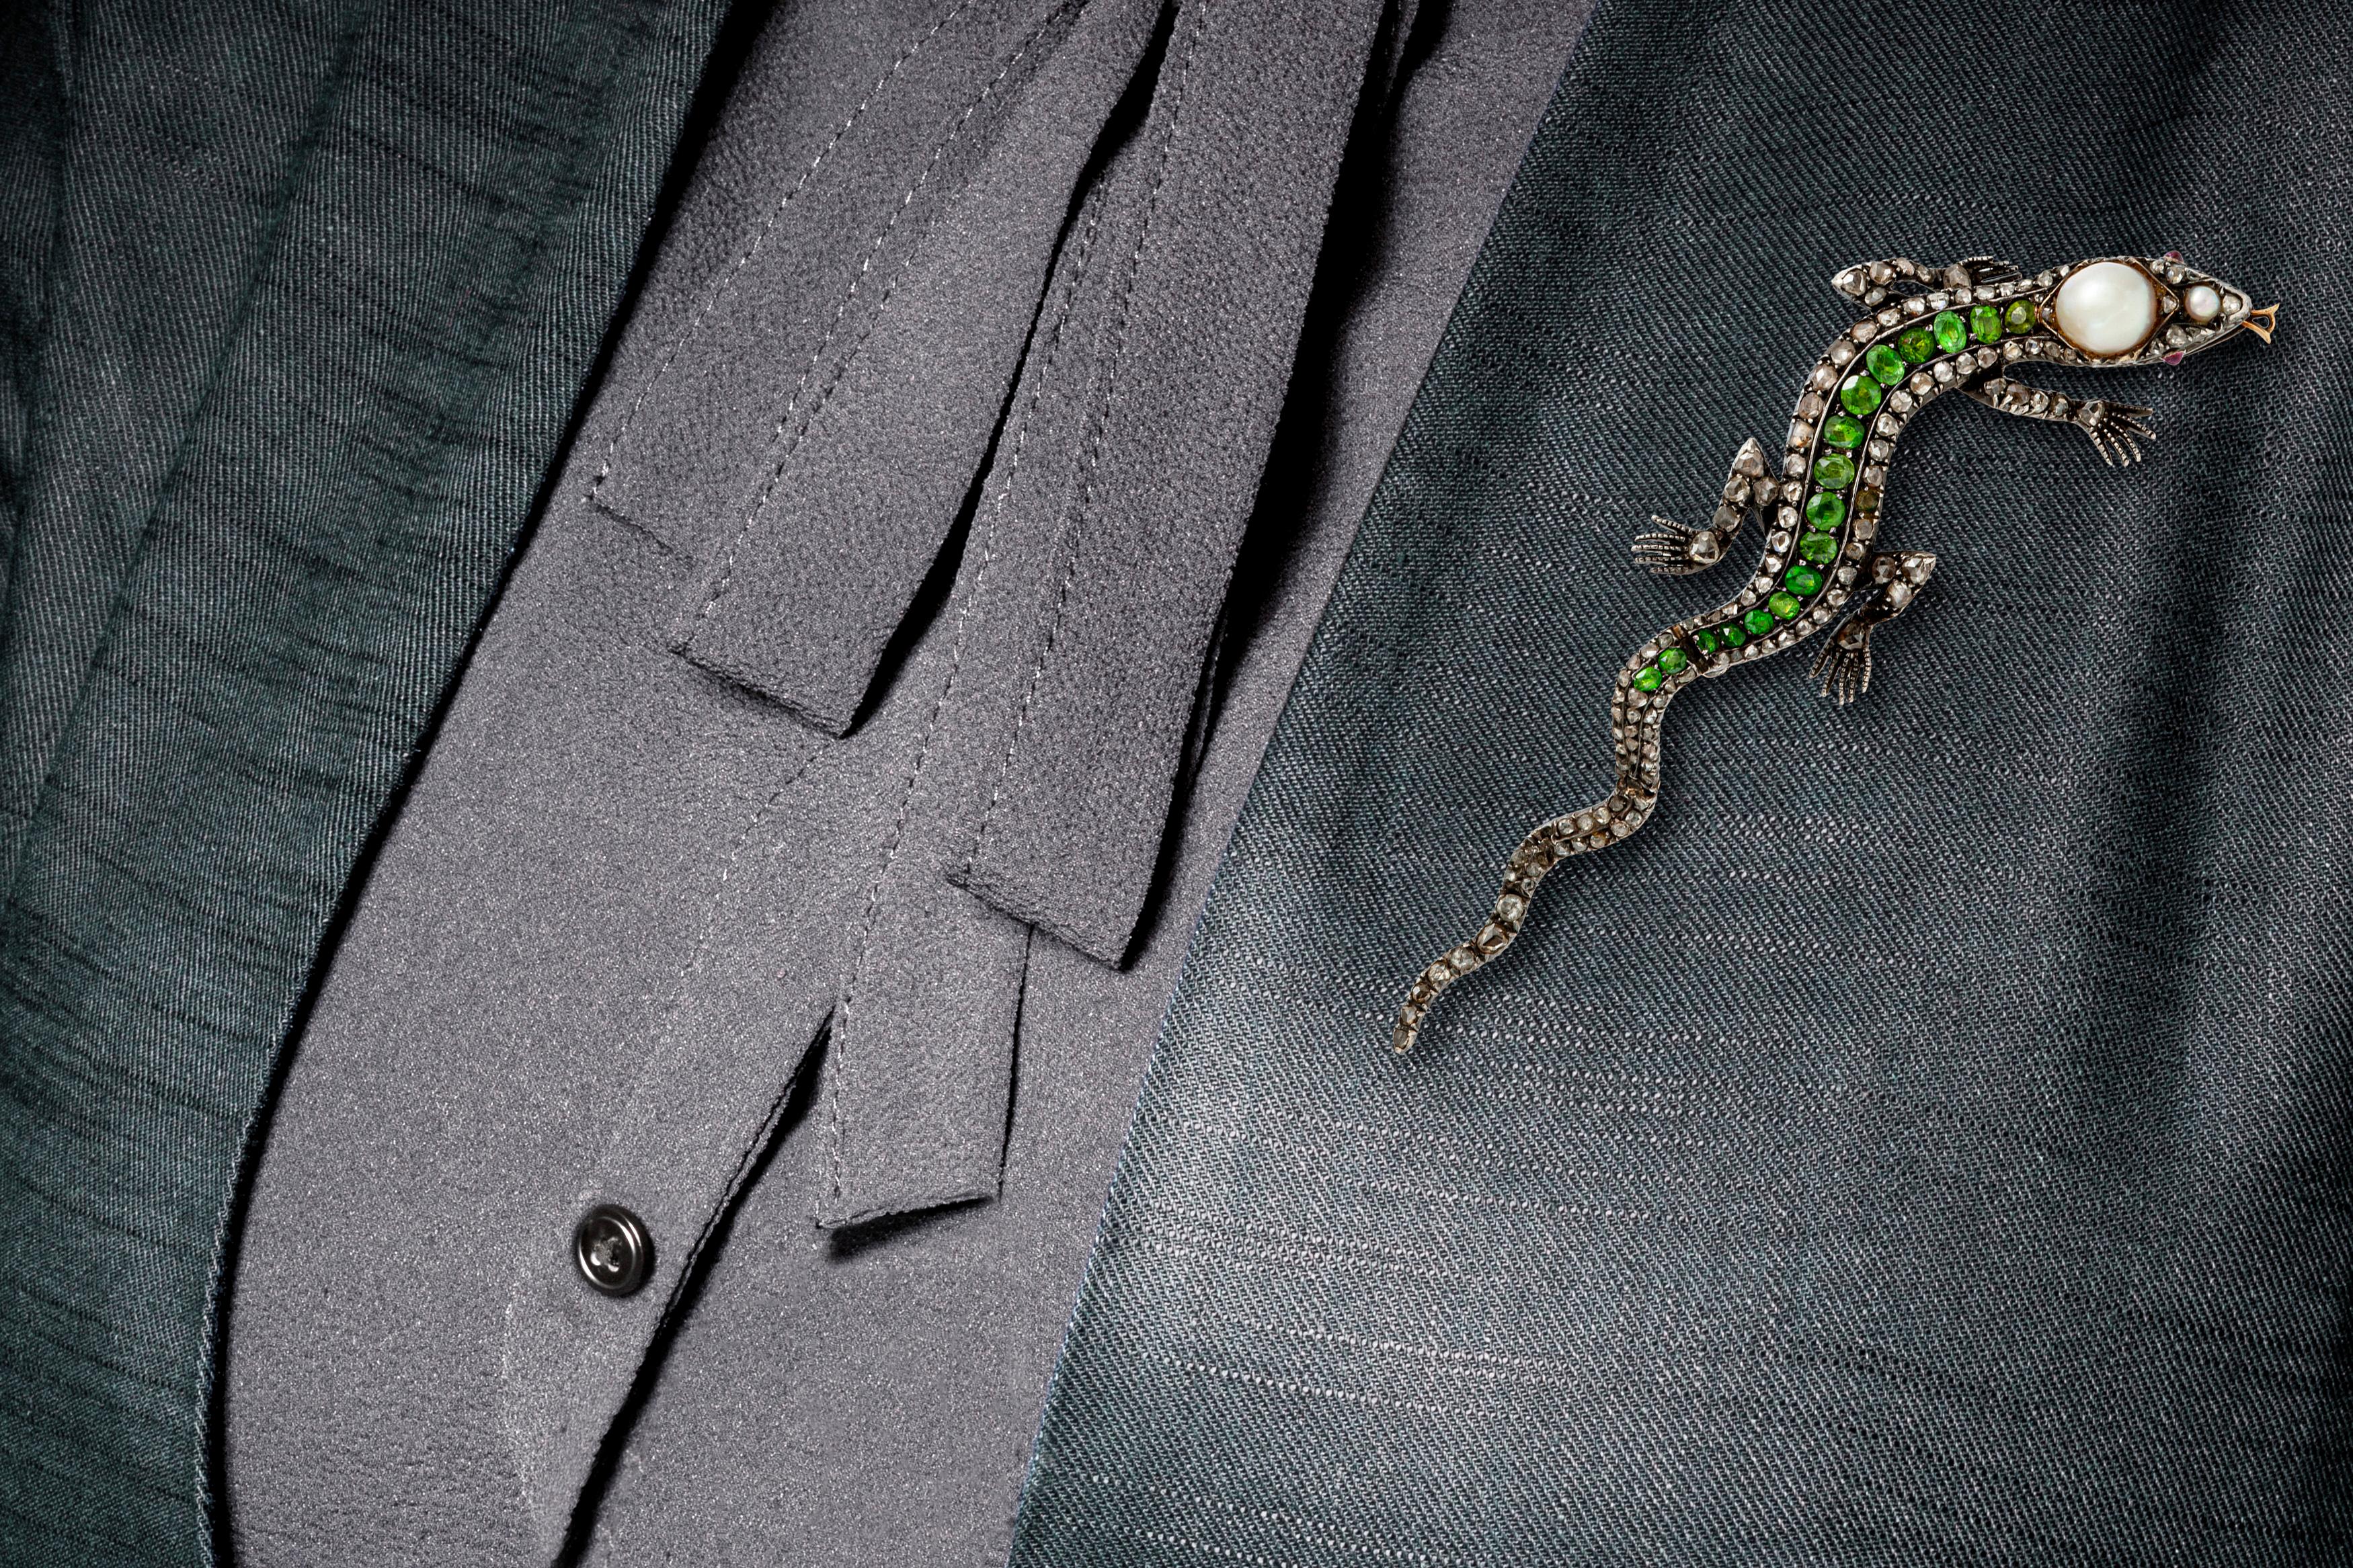 Lizard pin, finely crafted in silver and gold with pearls, tsavorite and diamonds. Circa 1900's.